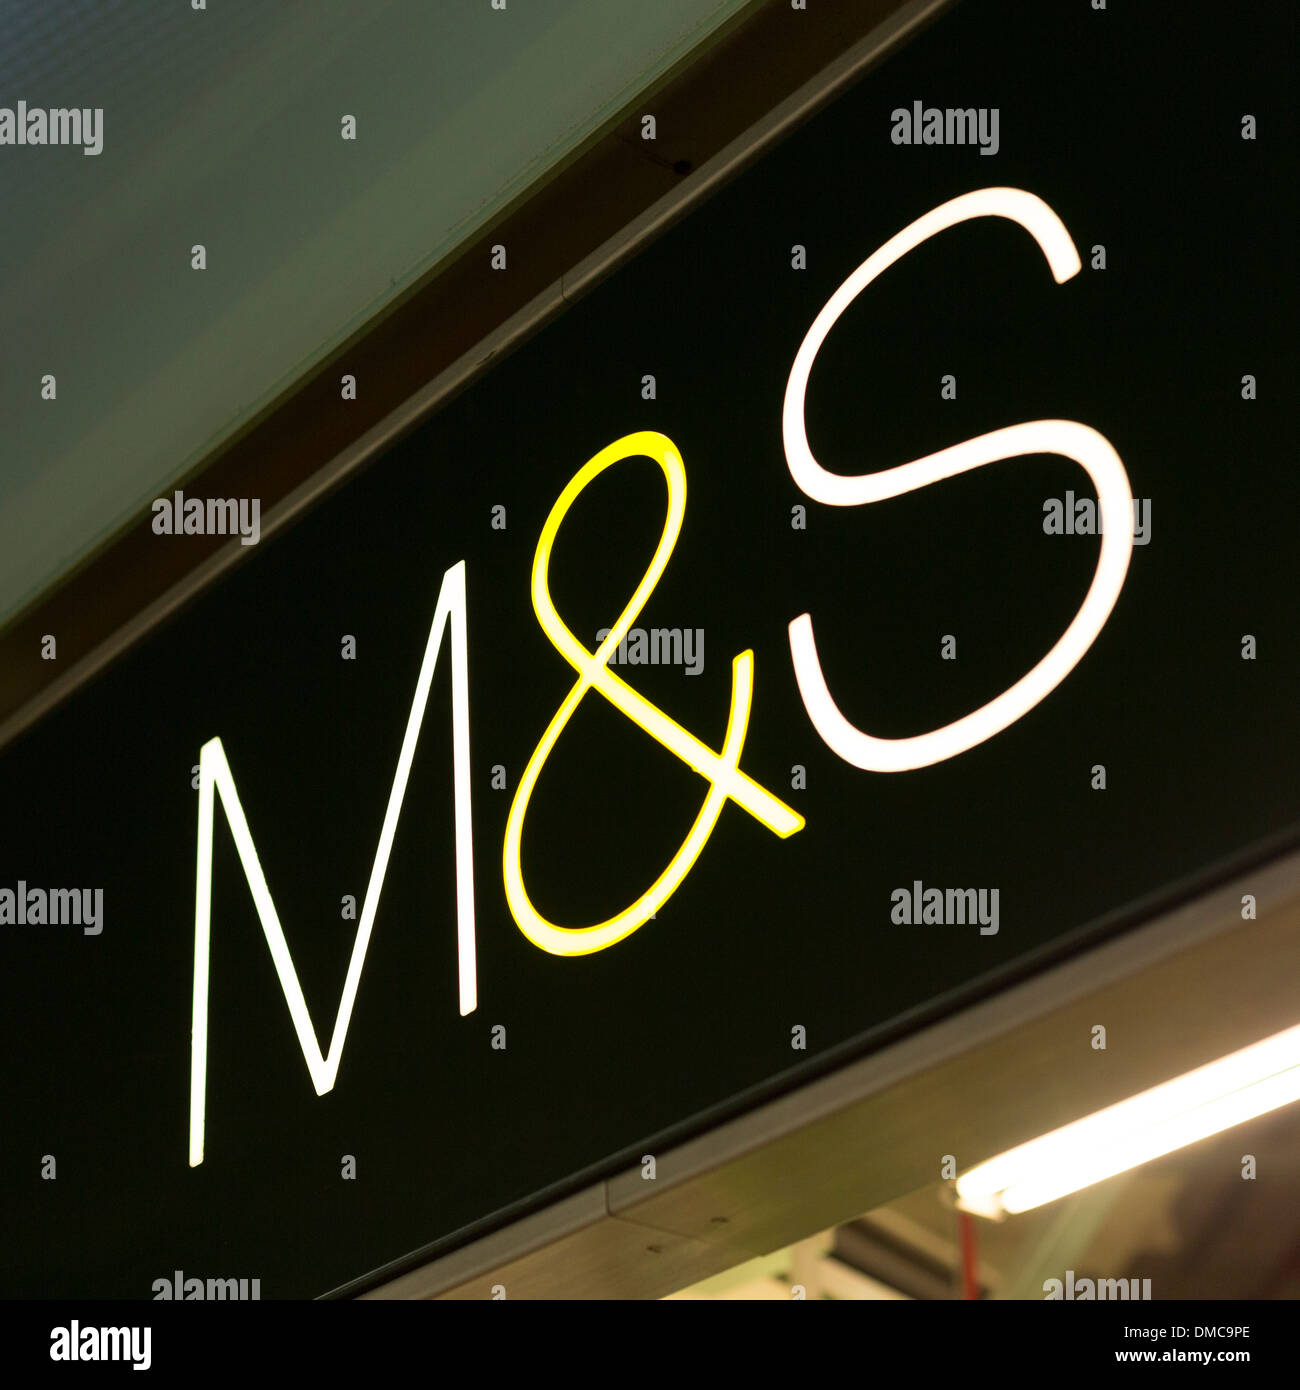 SIgn above M&S store entrance Stock Photo